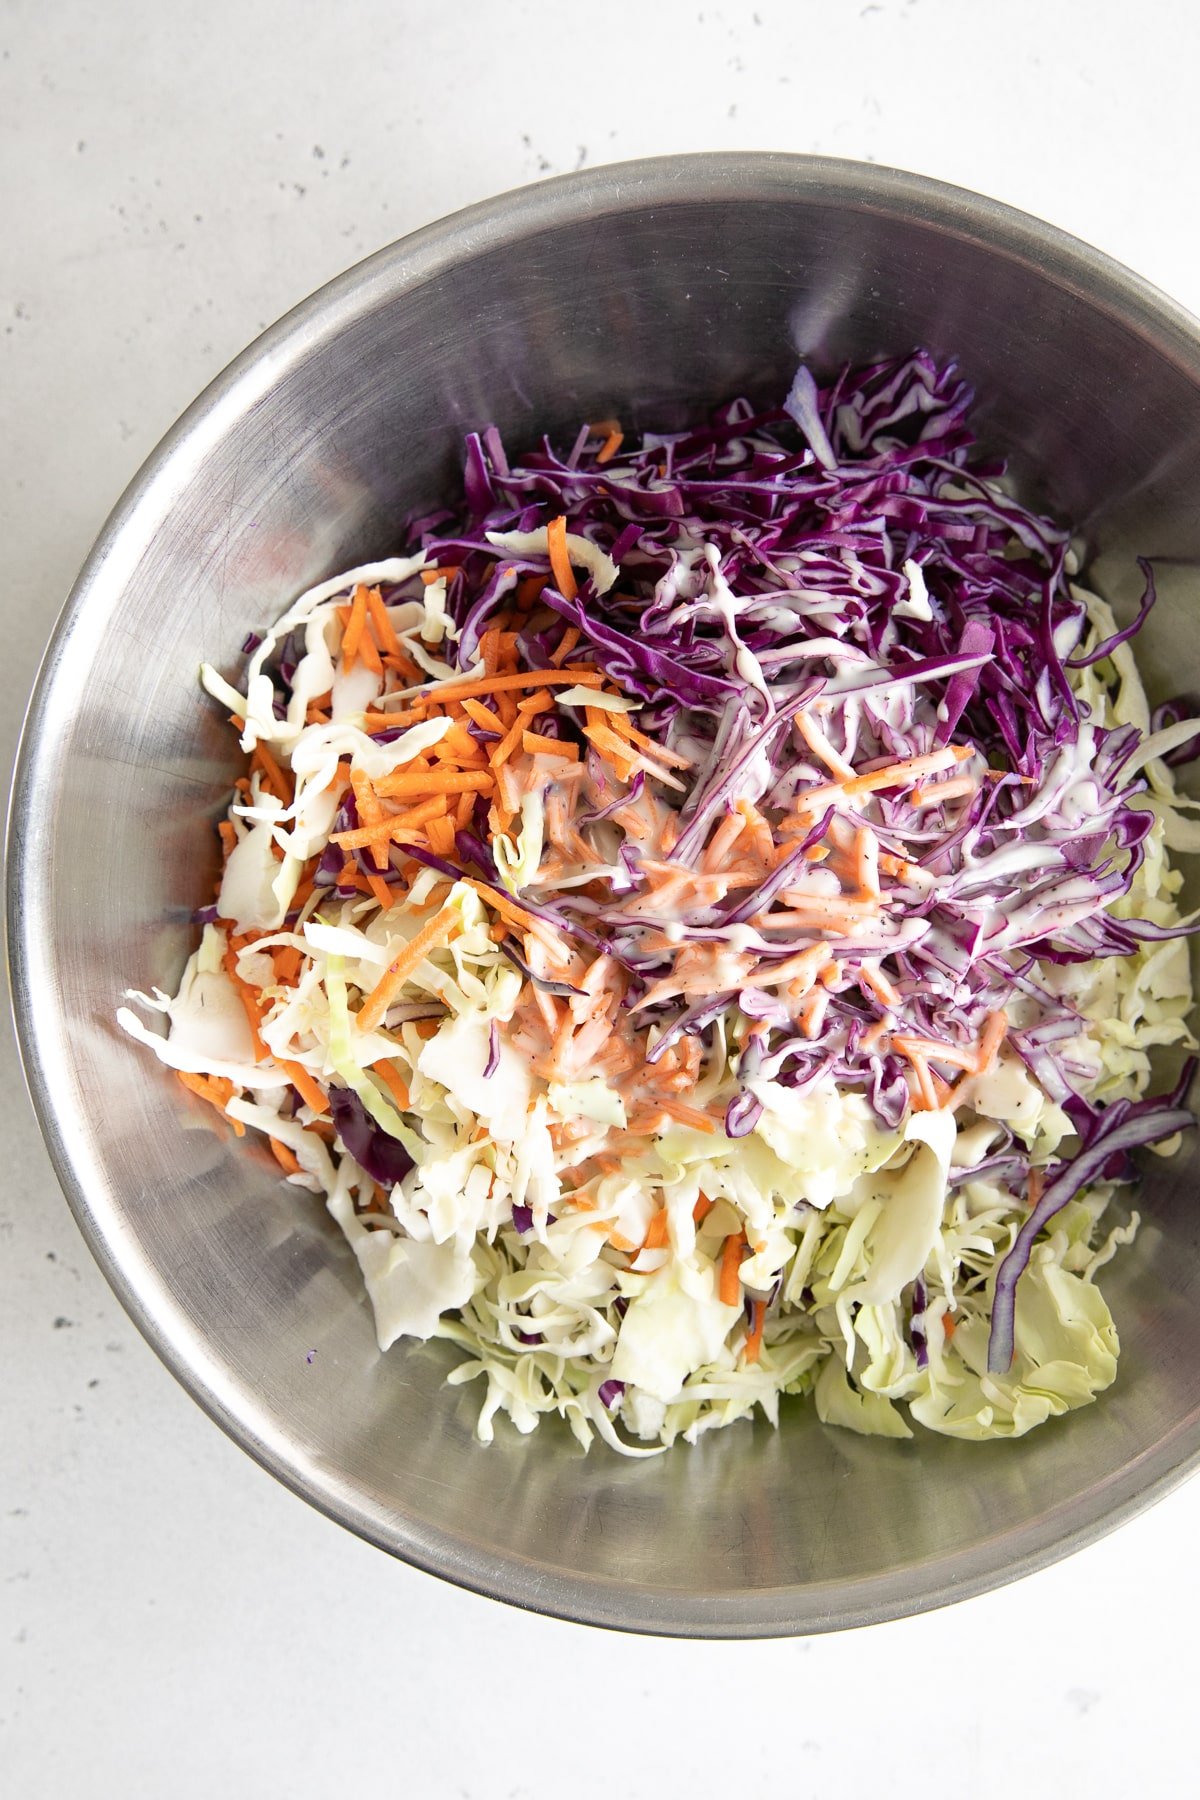 Large mixing bowl filled with shredded cabbage and carrots soaked in creamy coleslaw dressing.